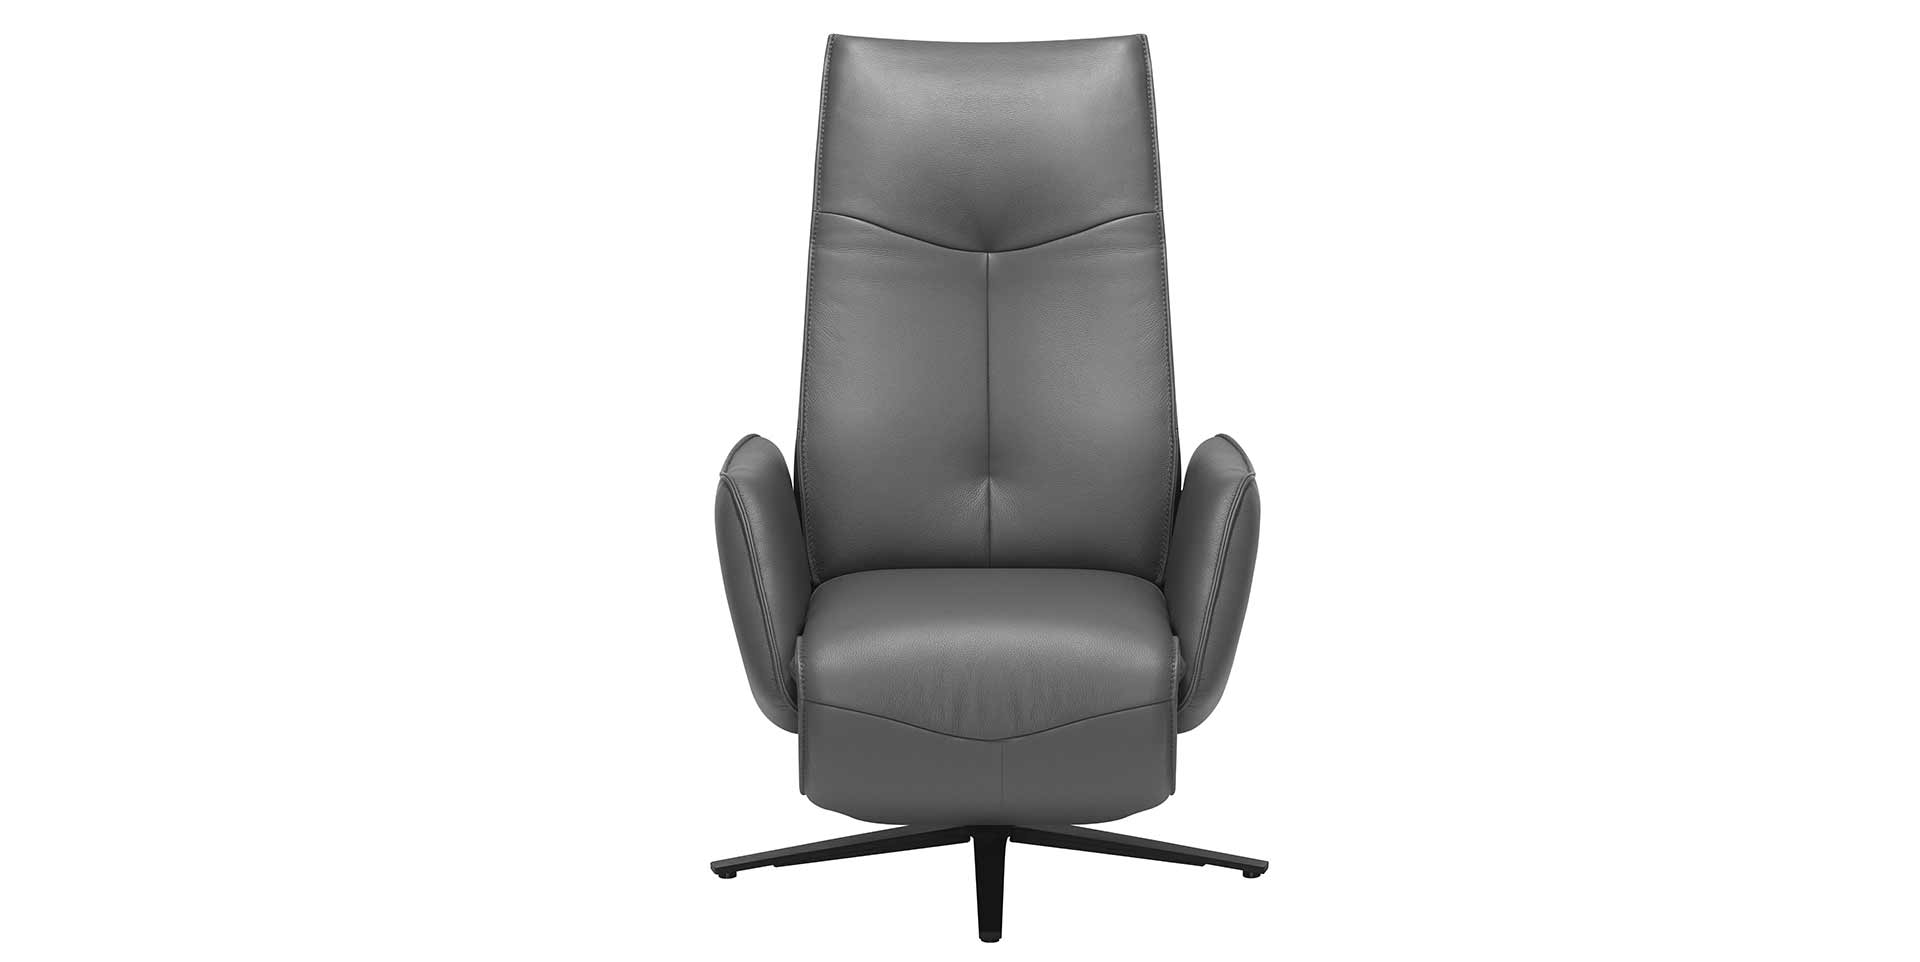 Slider Fauteuil relaxation 7917 (image 3)